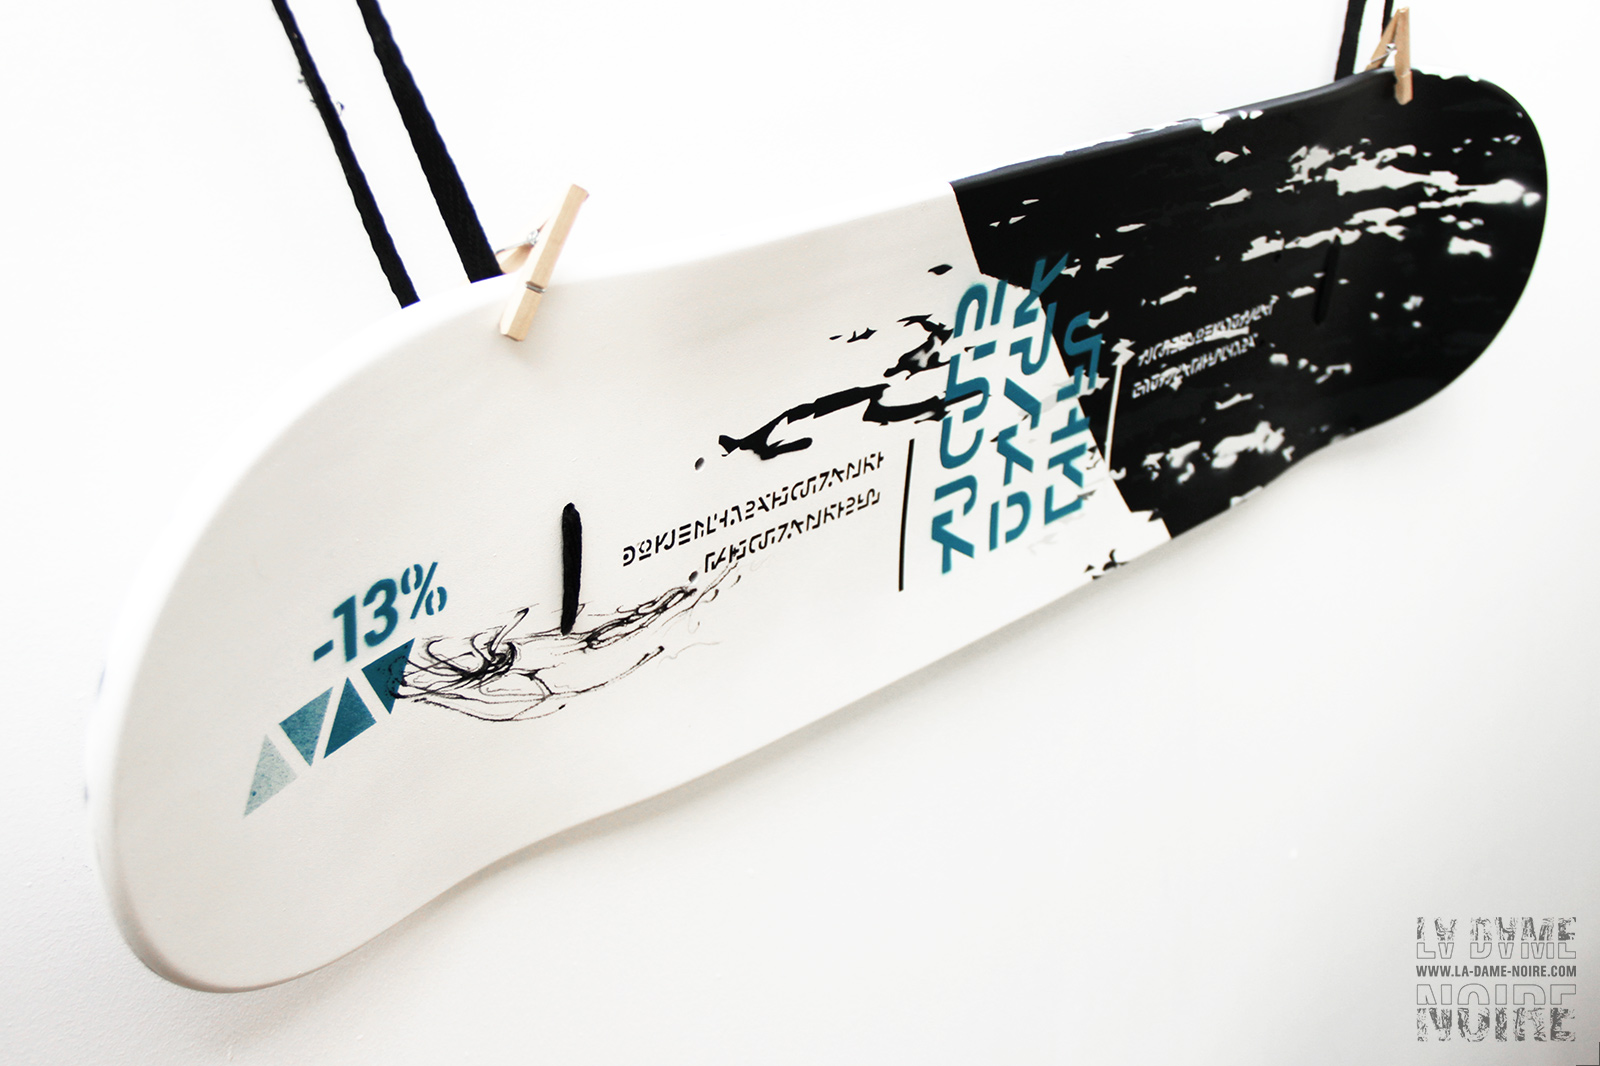 Details of the skateboard with blue graphic shapes